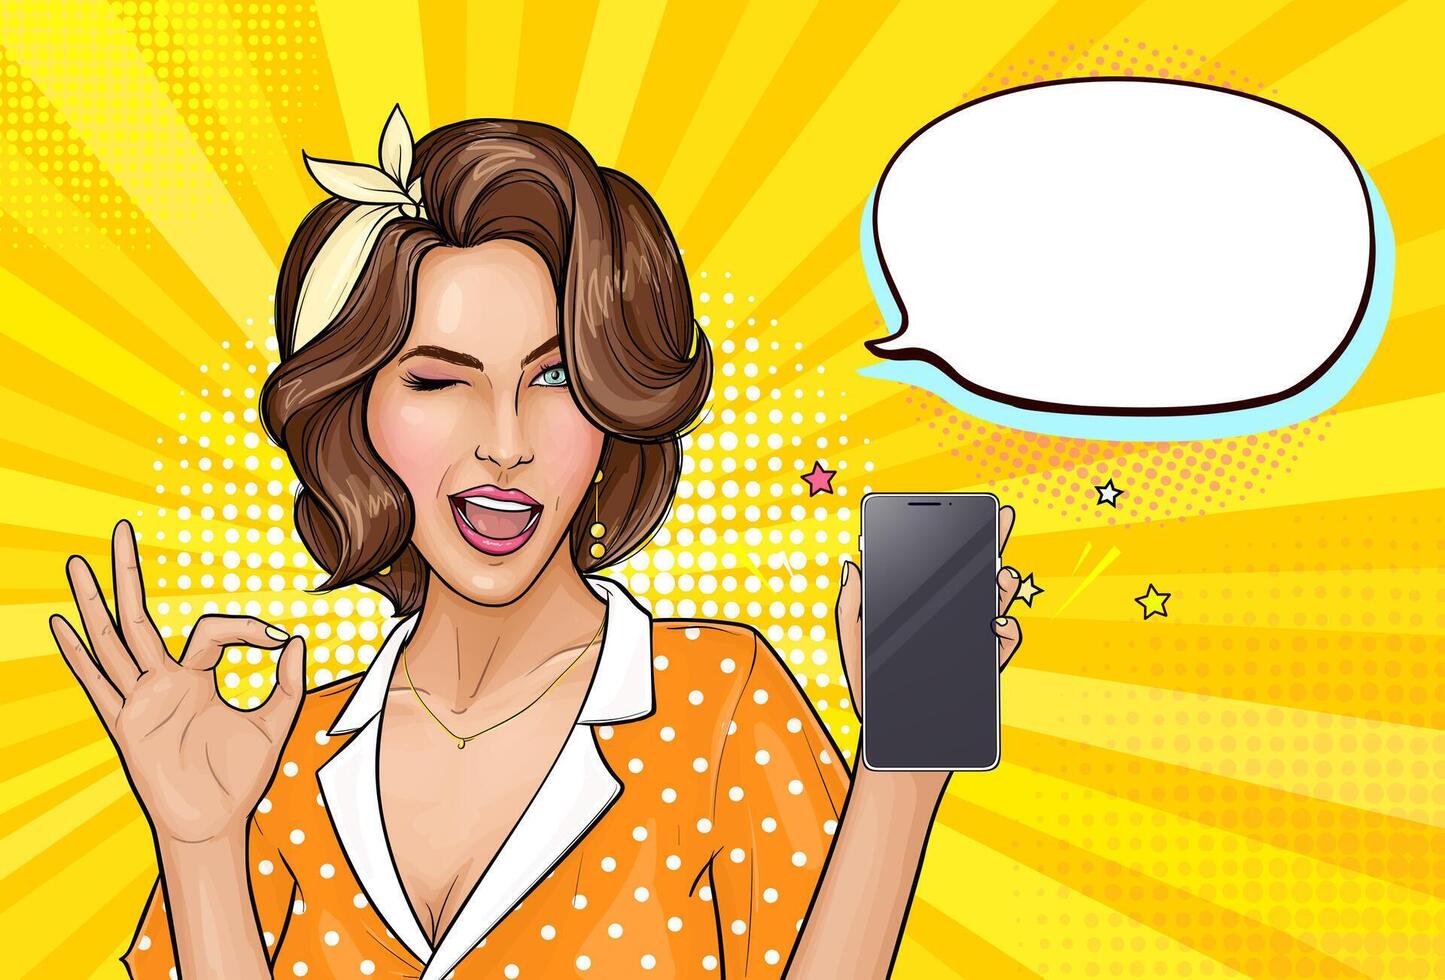 Pop art girl holding mobile phone. Winking woman showing screen of new smartphone and OK sign. Pretty lady on yellow background with empty speech bubble. illustration for digital advertisement. vector